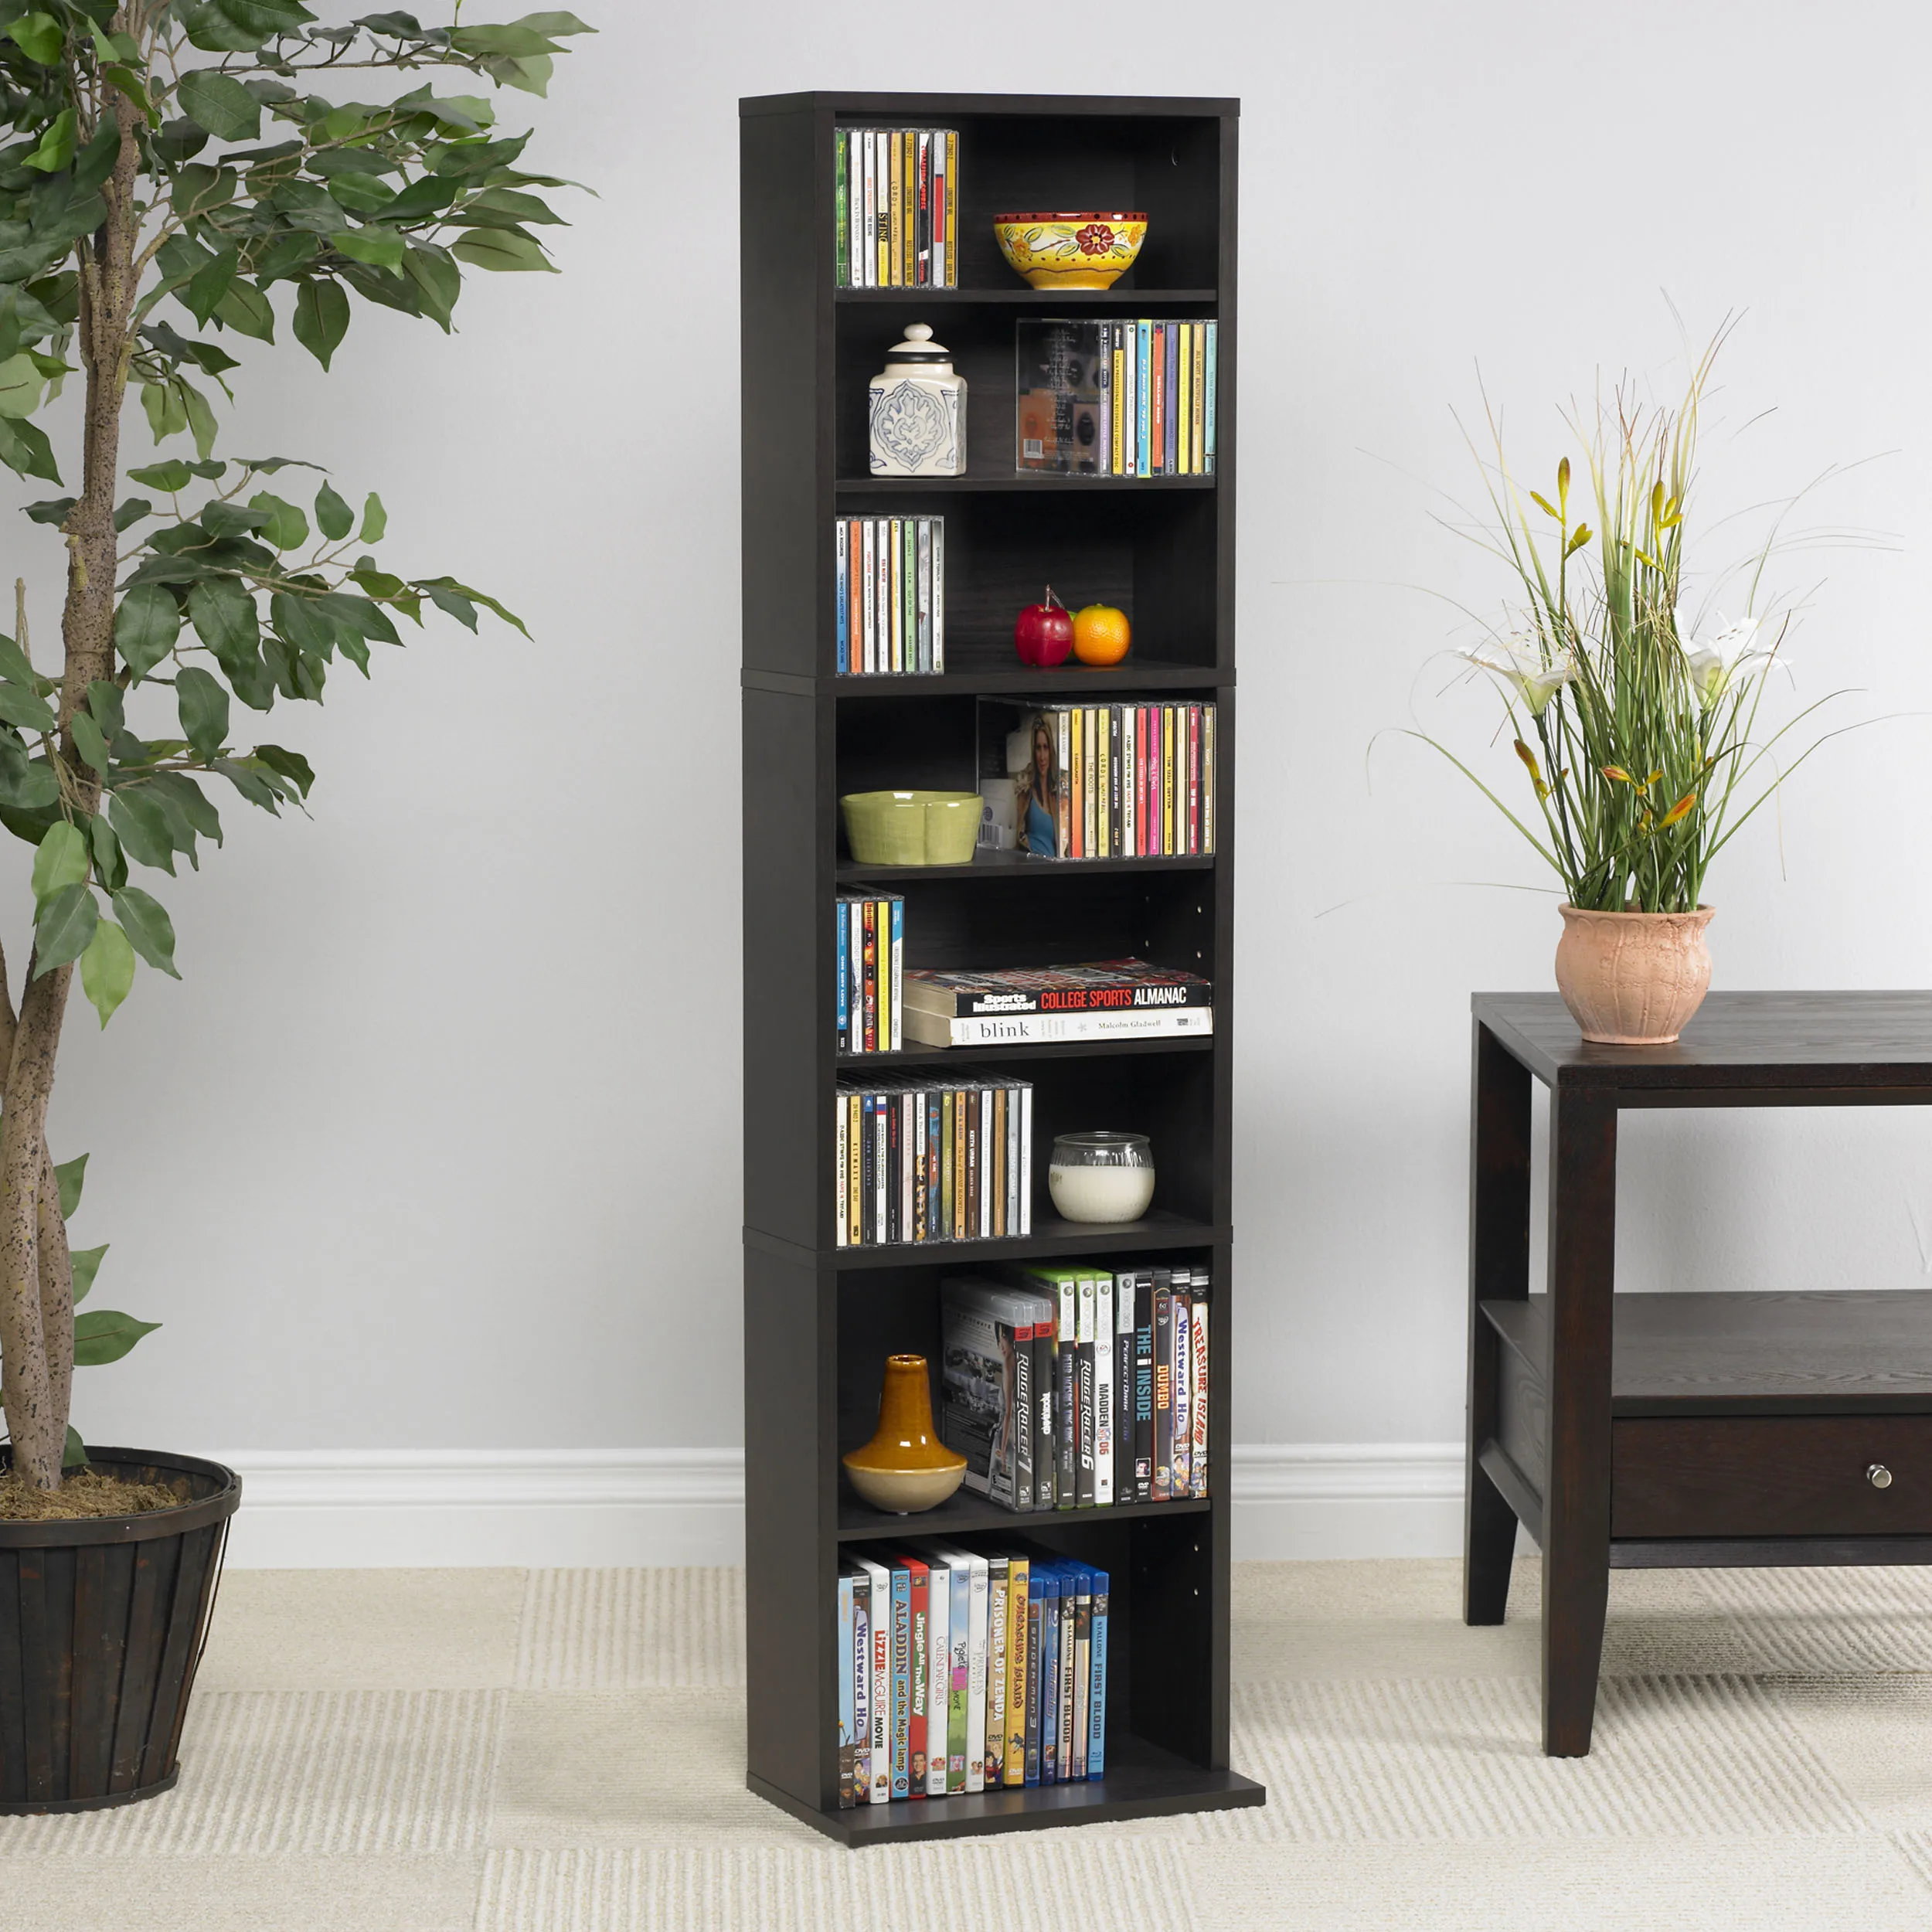 

Summit 261CD/114DVD/132 Blu-ray Espresso Liveing Room Bookcase Particle Board Black Brown storage Rack 8-Layers shelf cabinet